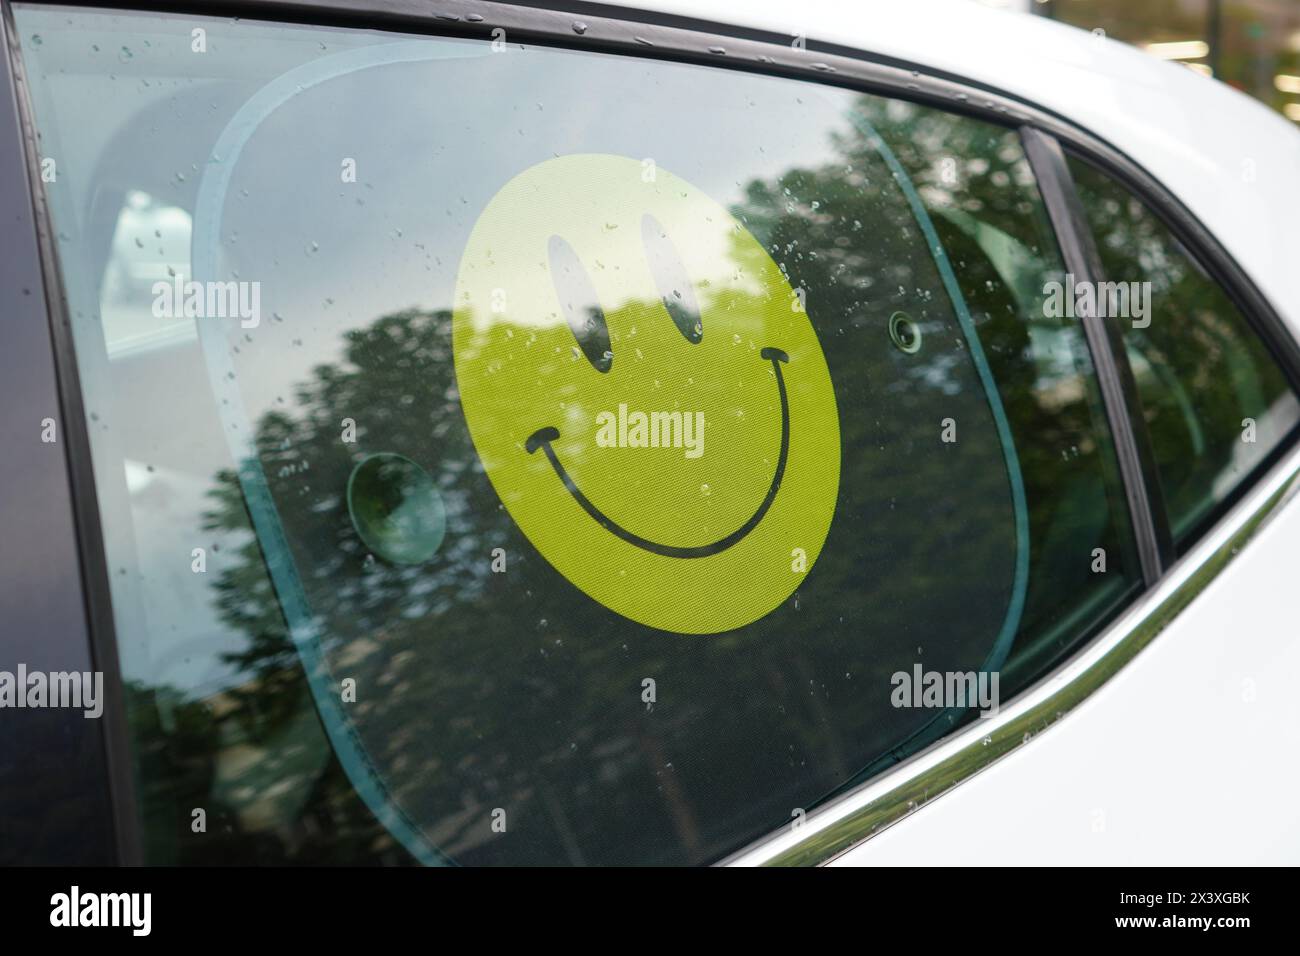 Yellow smiley face sunshade on back side window of white car Stock Photo